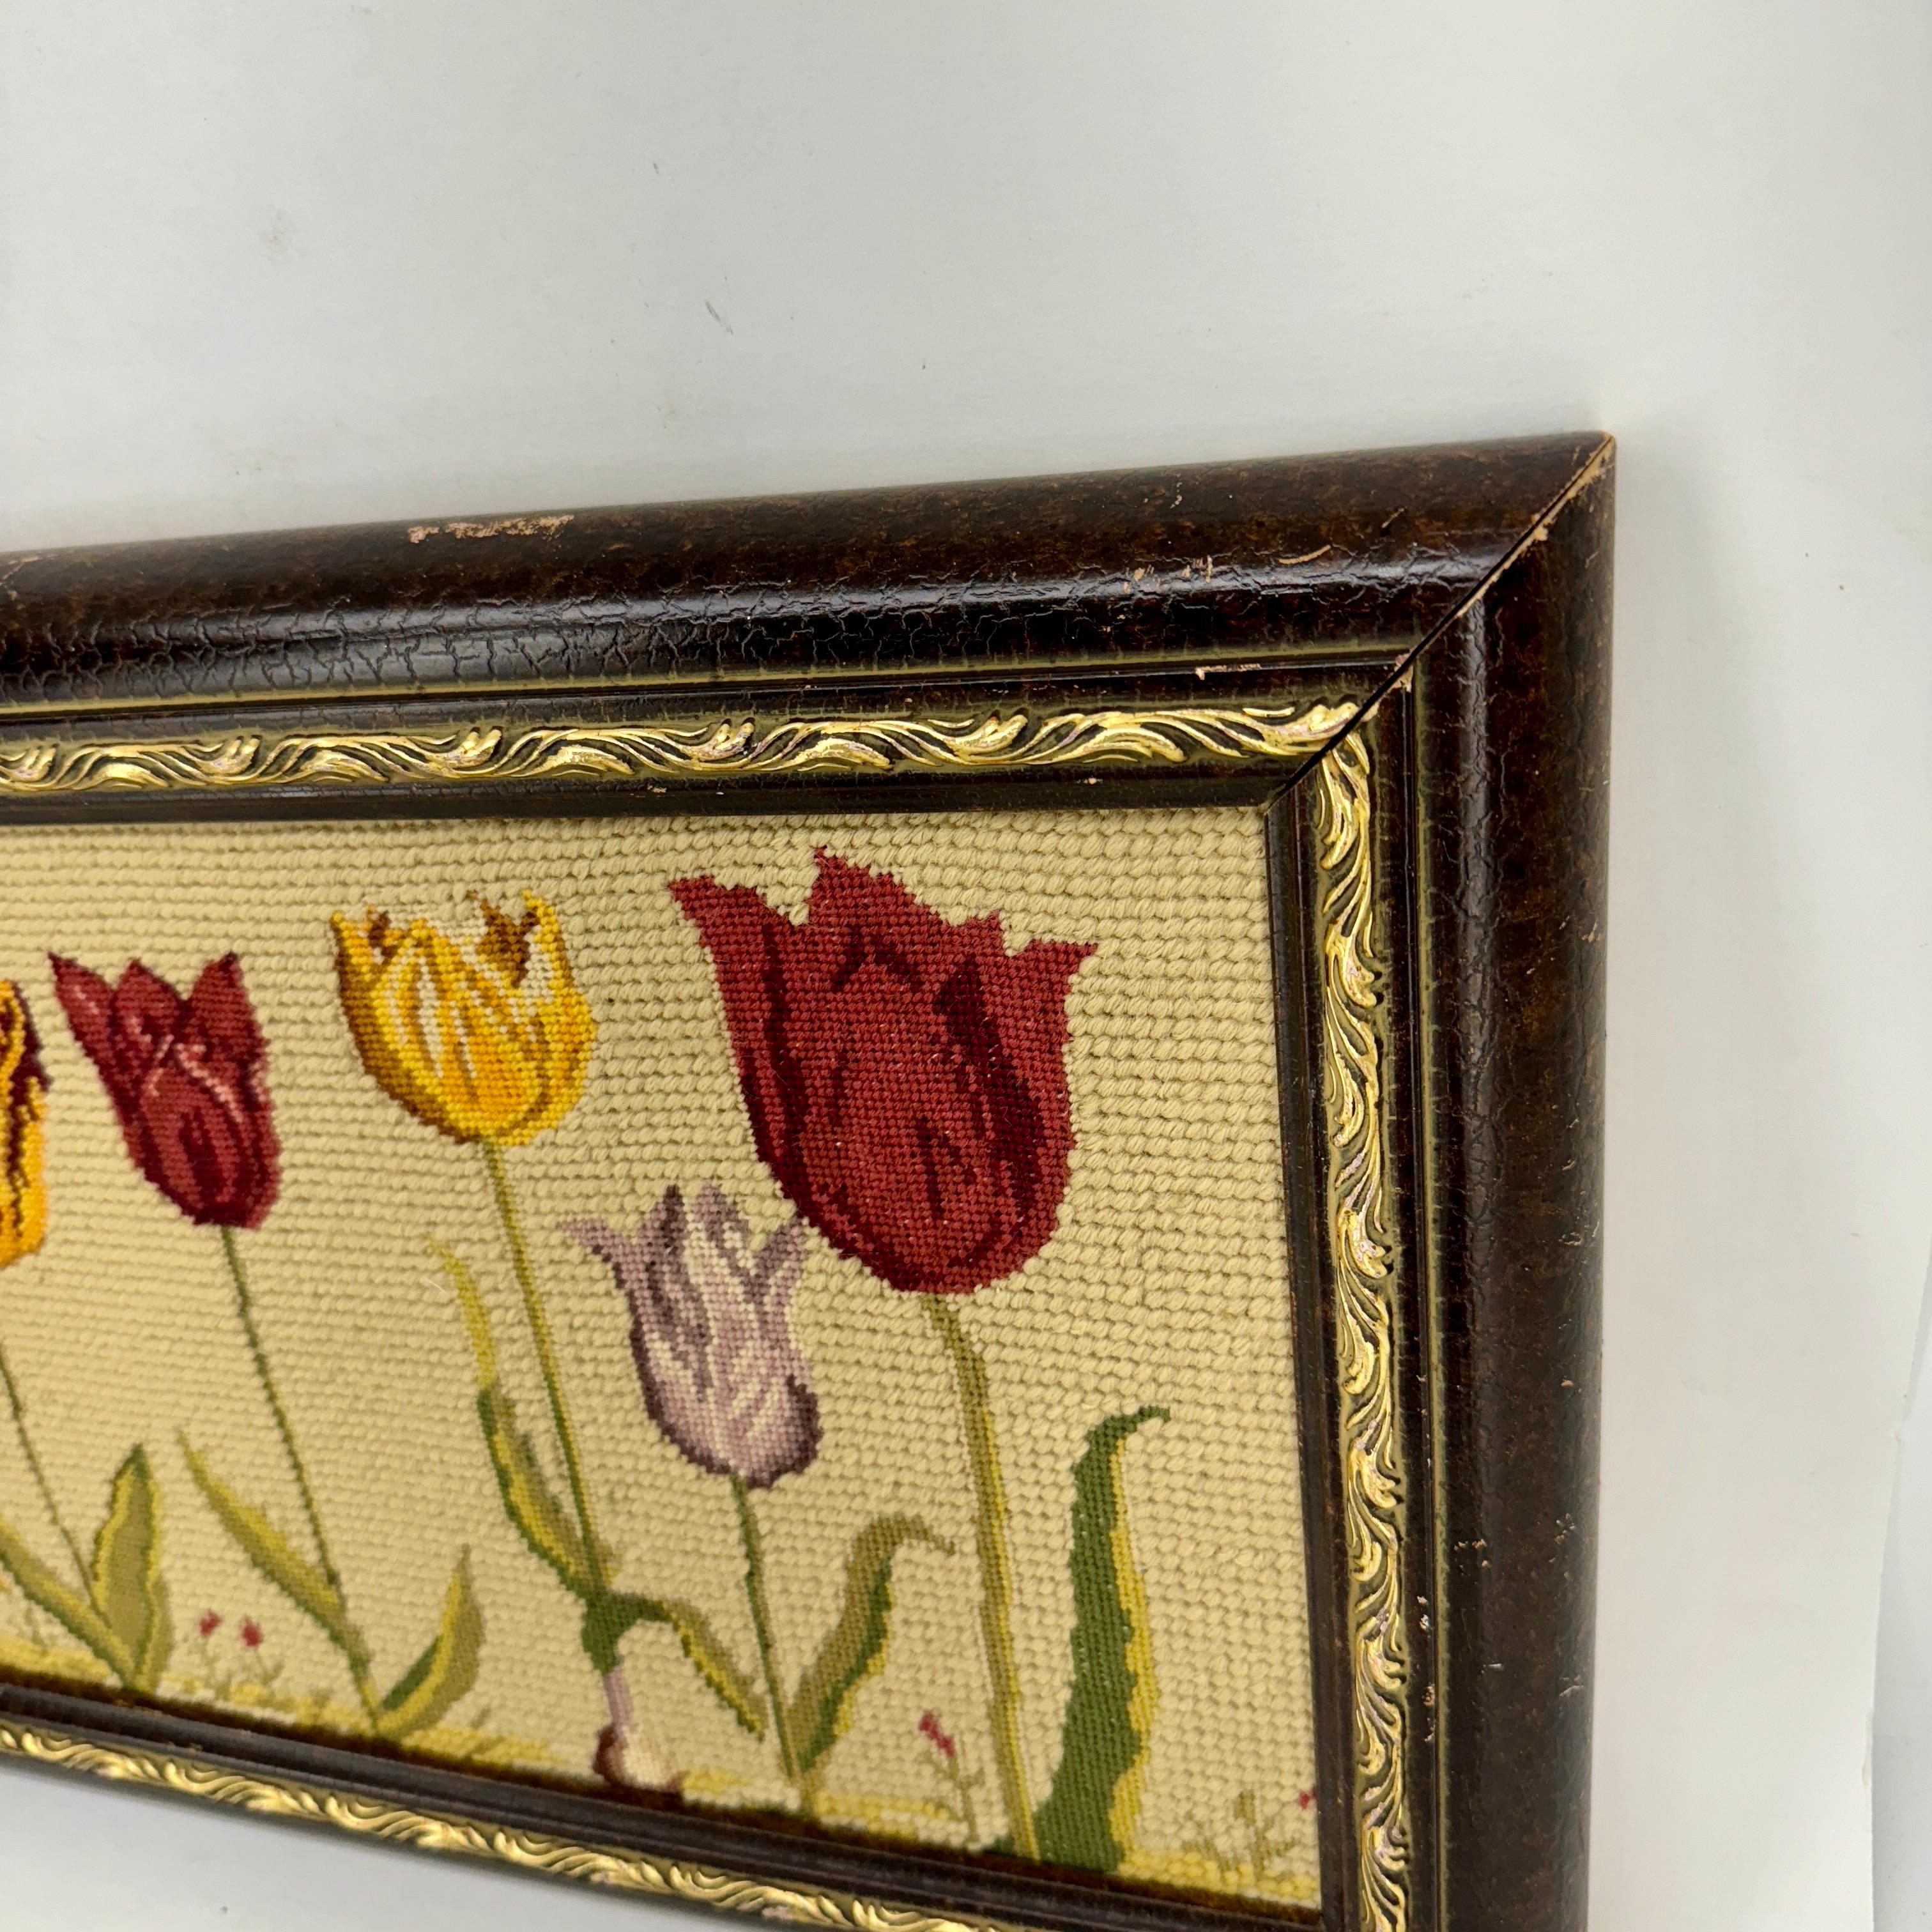 Hand-Crafted Chelsea Textiles Original Needlepoint Tulip Artwork In Red White and Yellow For Sale